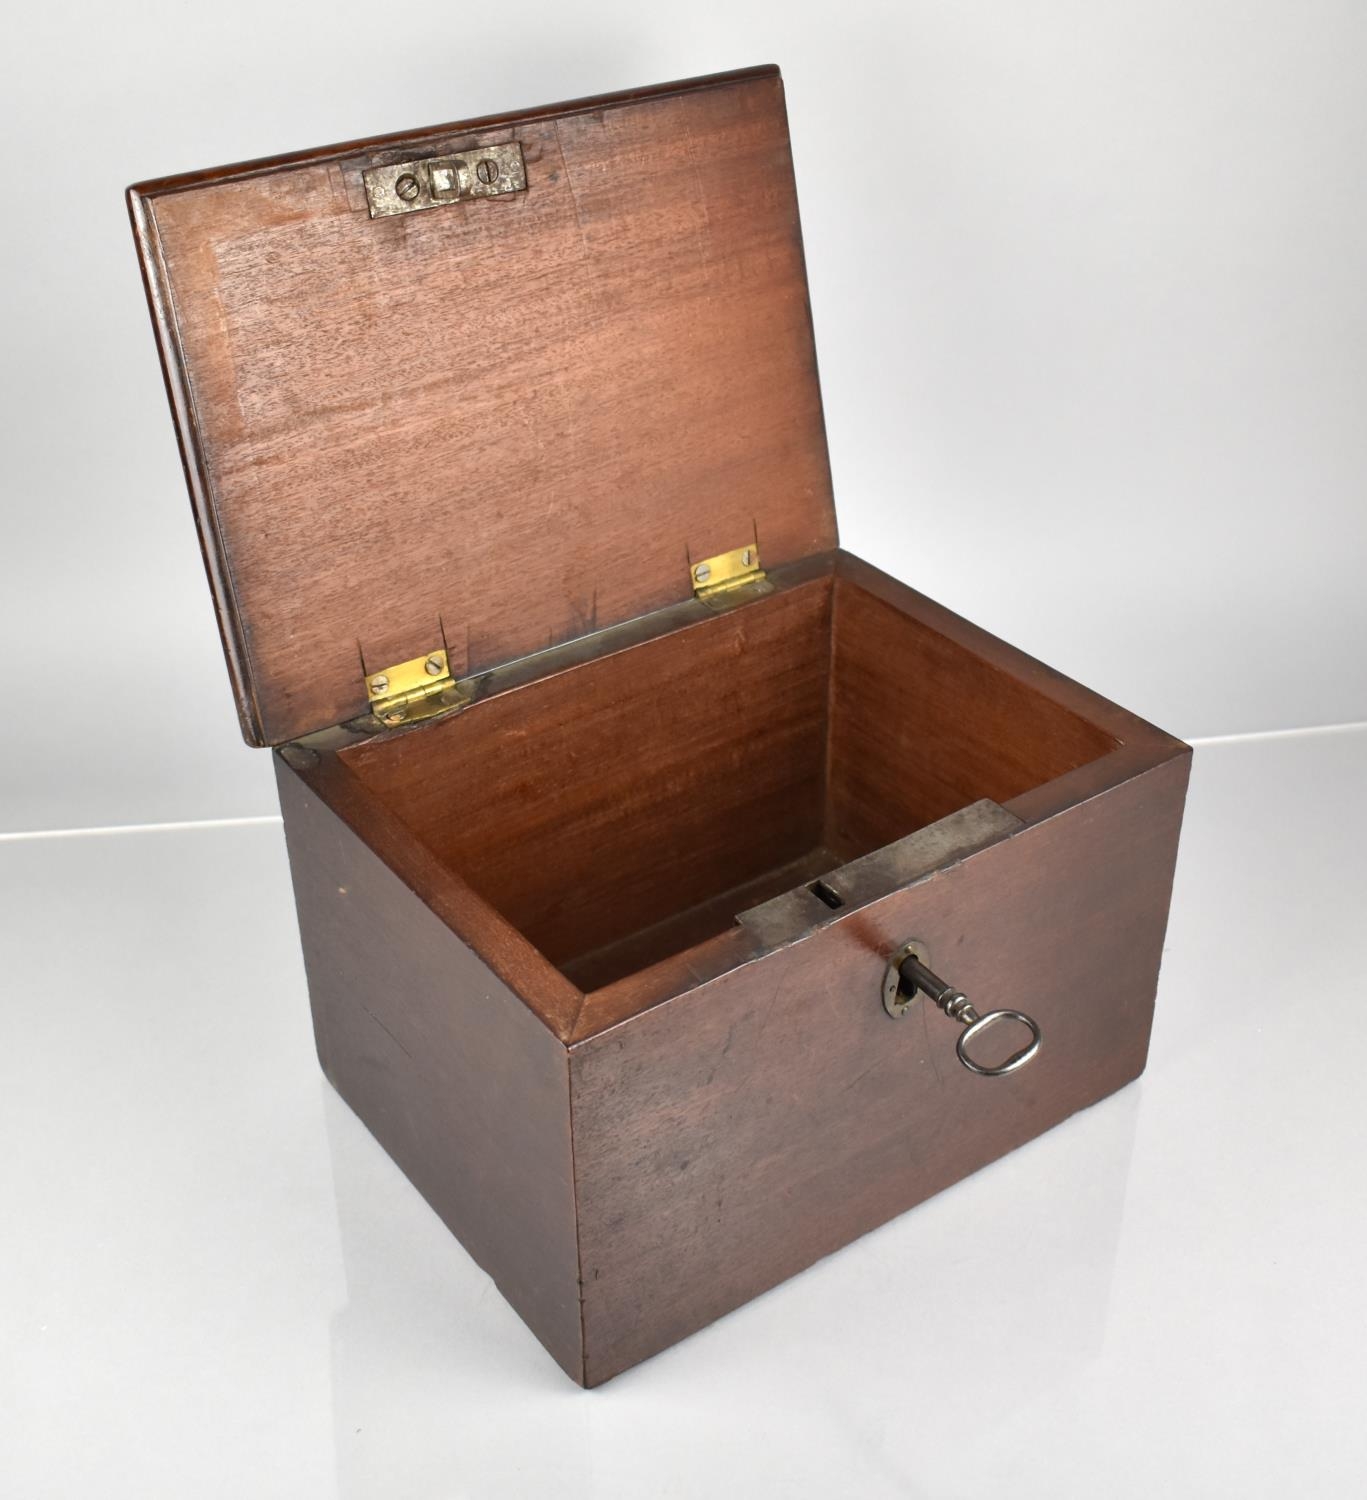 An Early 19th Century Mahogany Box with Hinged Lid with Original Lock and Key, 30x22x19cm High - Image 4 of 4